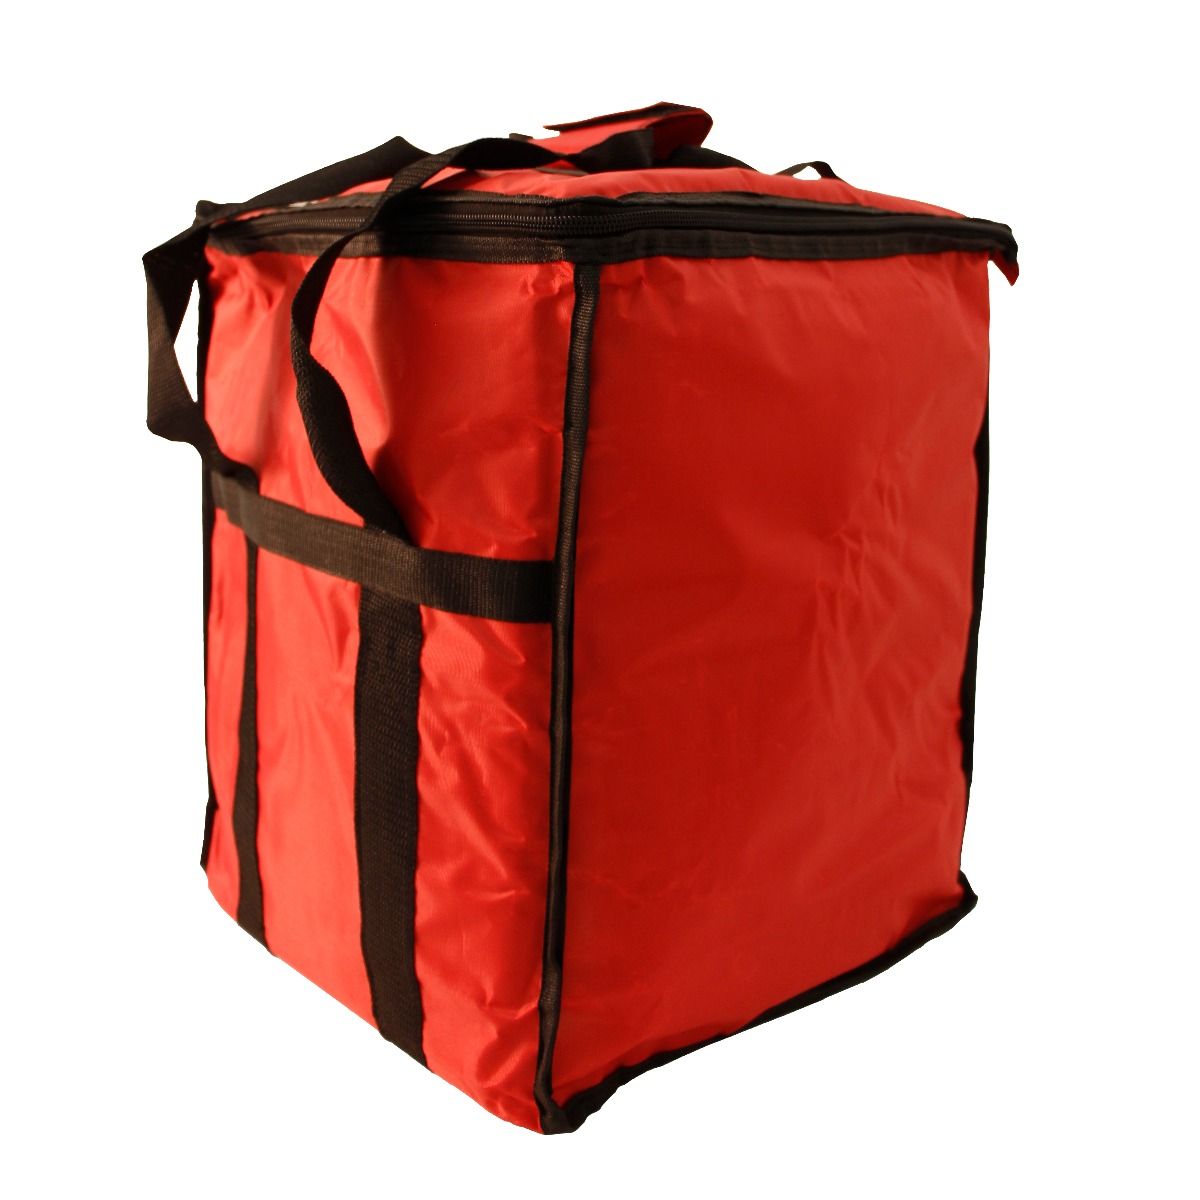 New Excellent Insulated Food Delivery Bag 23"x13"x15" Pan Carrier Red Nylon 